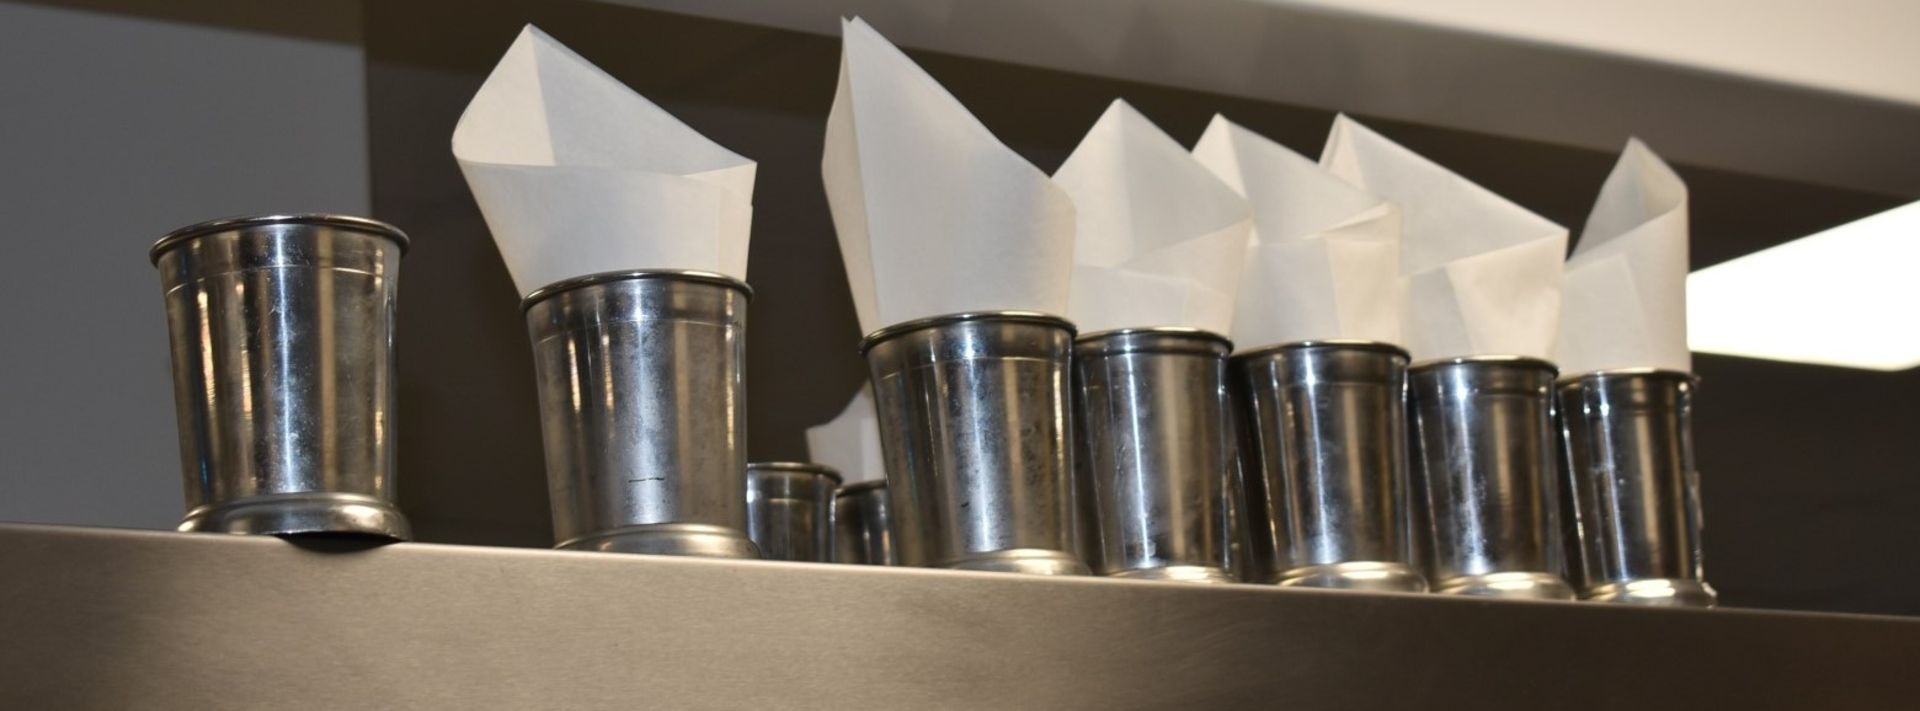 13 x Restaurant Chip Serving Buckets With Napkins By Mexclar - Stainless Steel Finish - Image 4 of 6